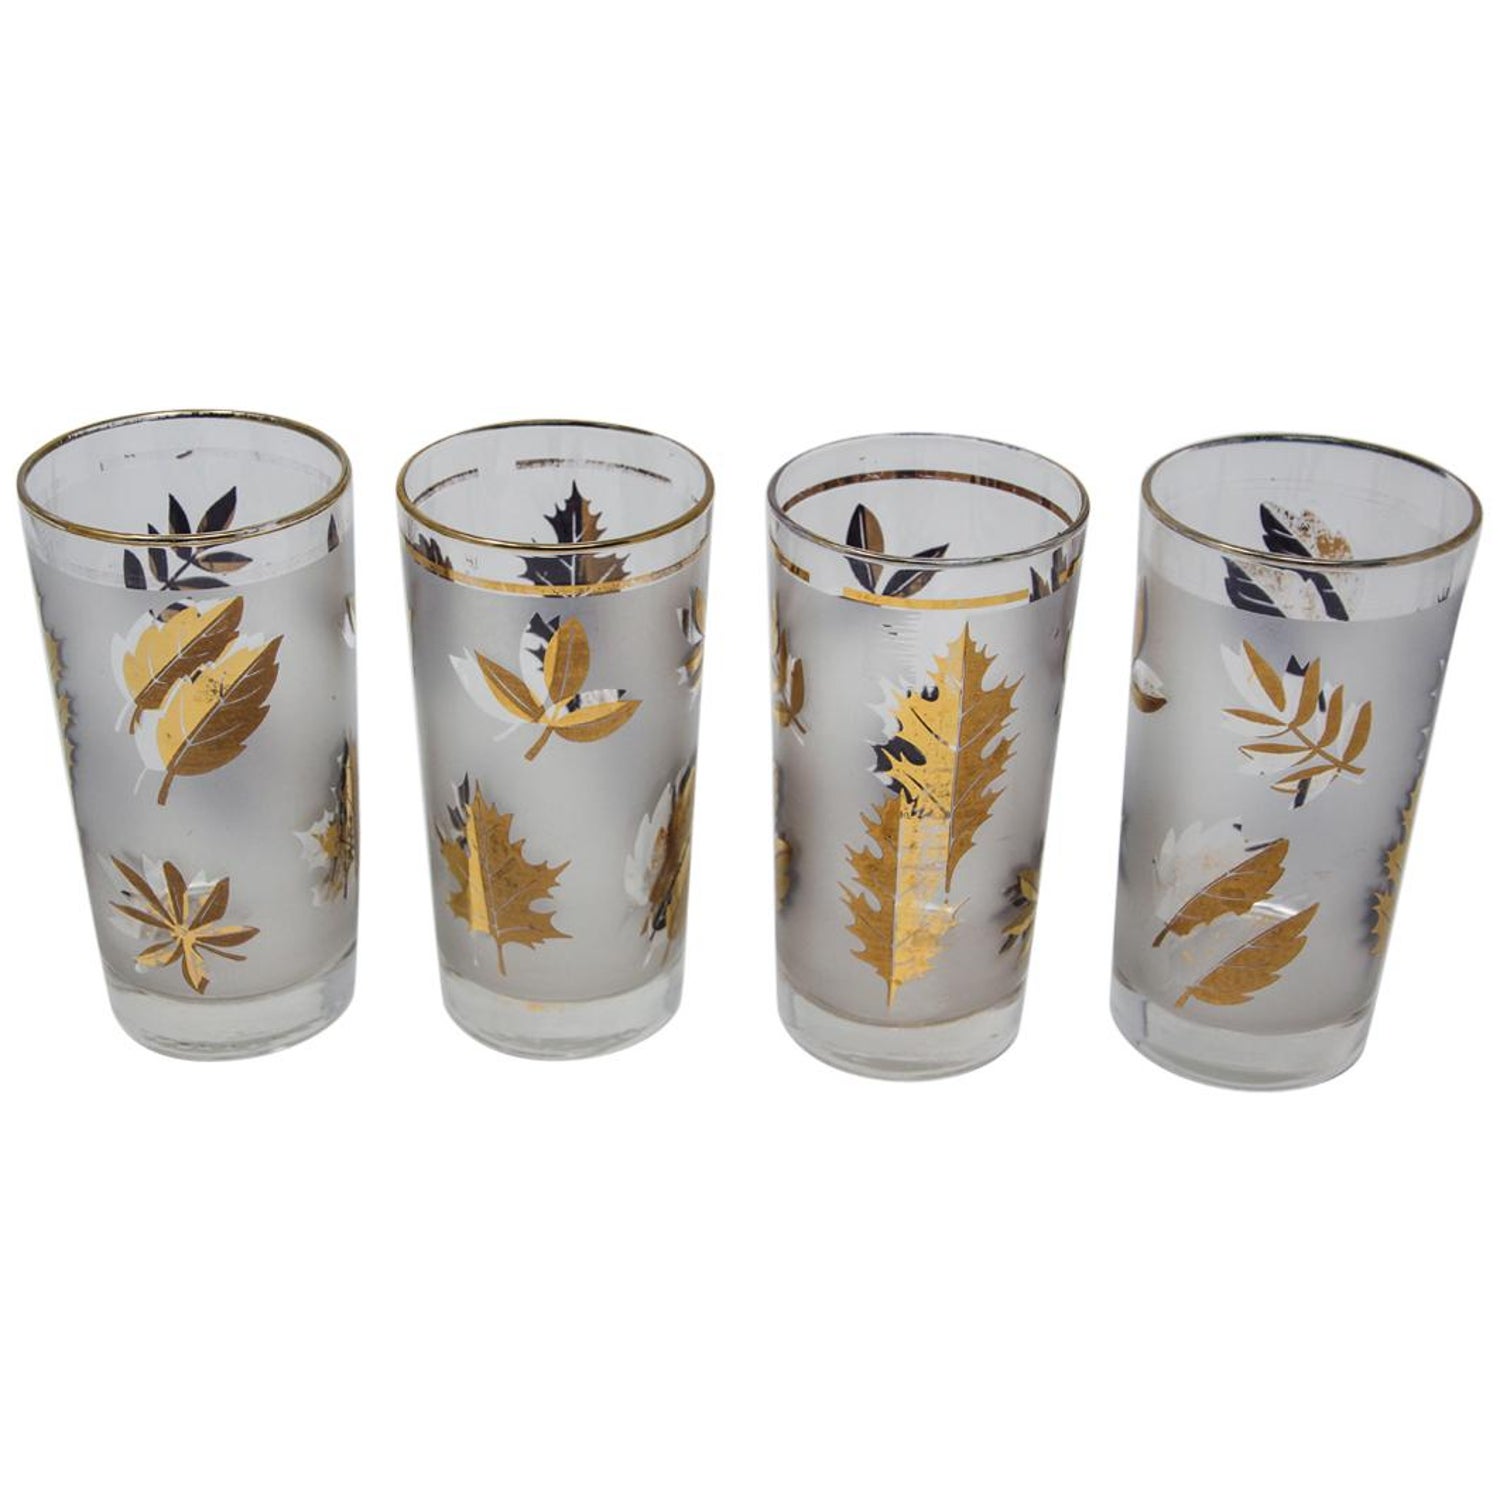 https://a.1stdibscdn.com/set-of-four-vintage-cocktail-glasses-by-libbey-with-gold-lief-design-for-sale/1121189/f_225483721613544406543/22548372_master.jpg?width=1500